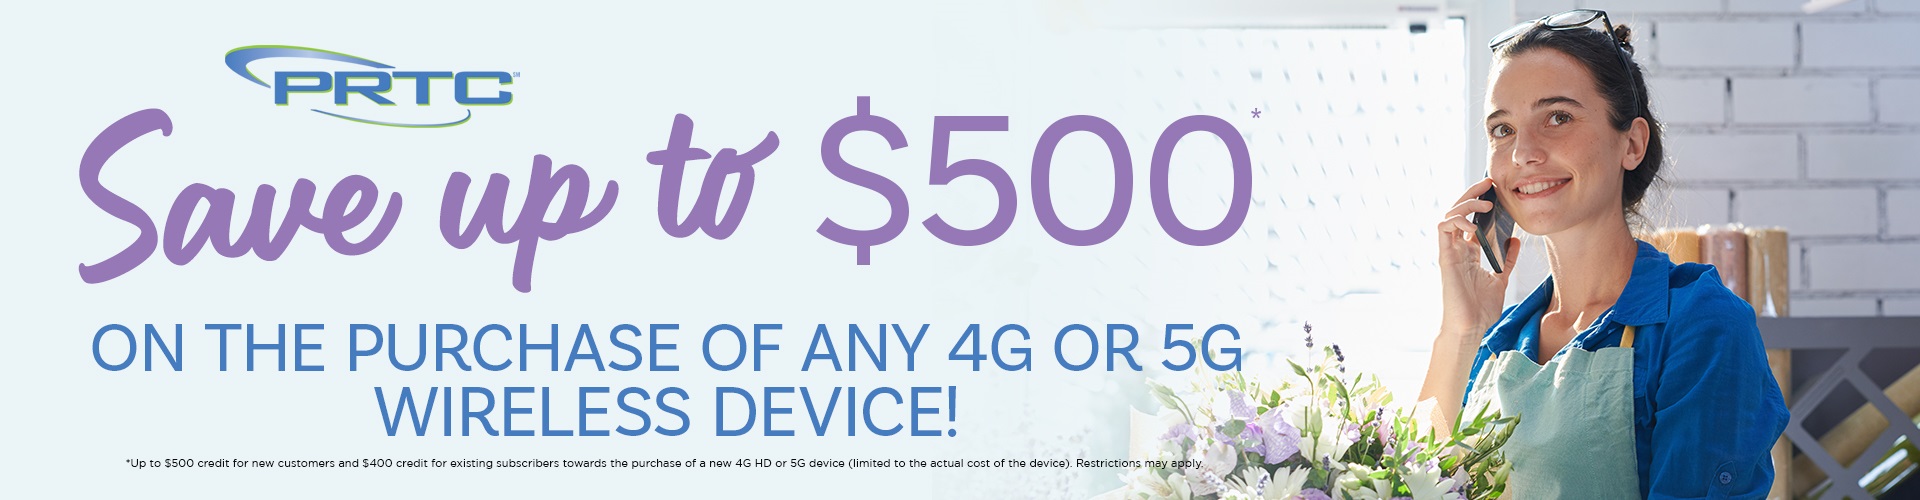 Save up to $500